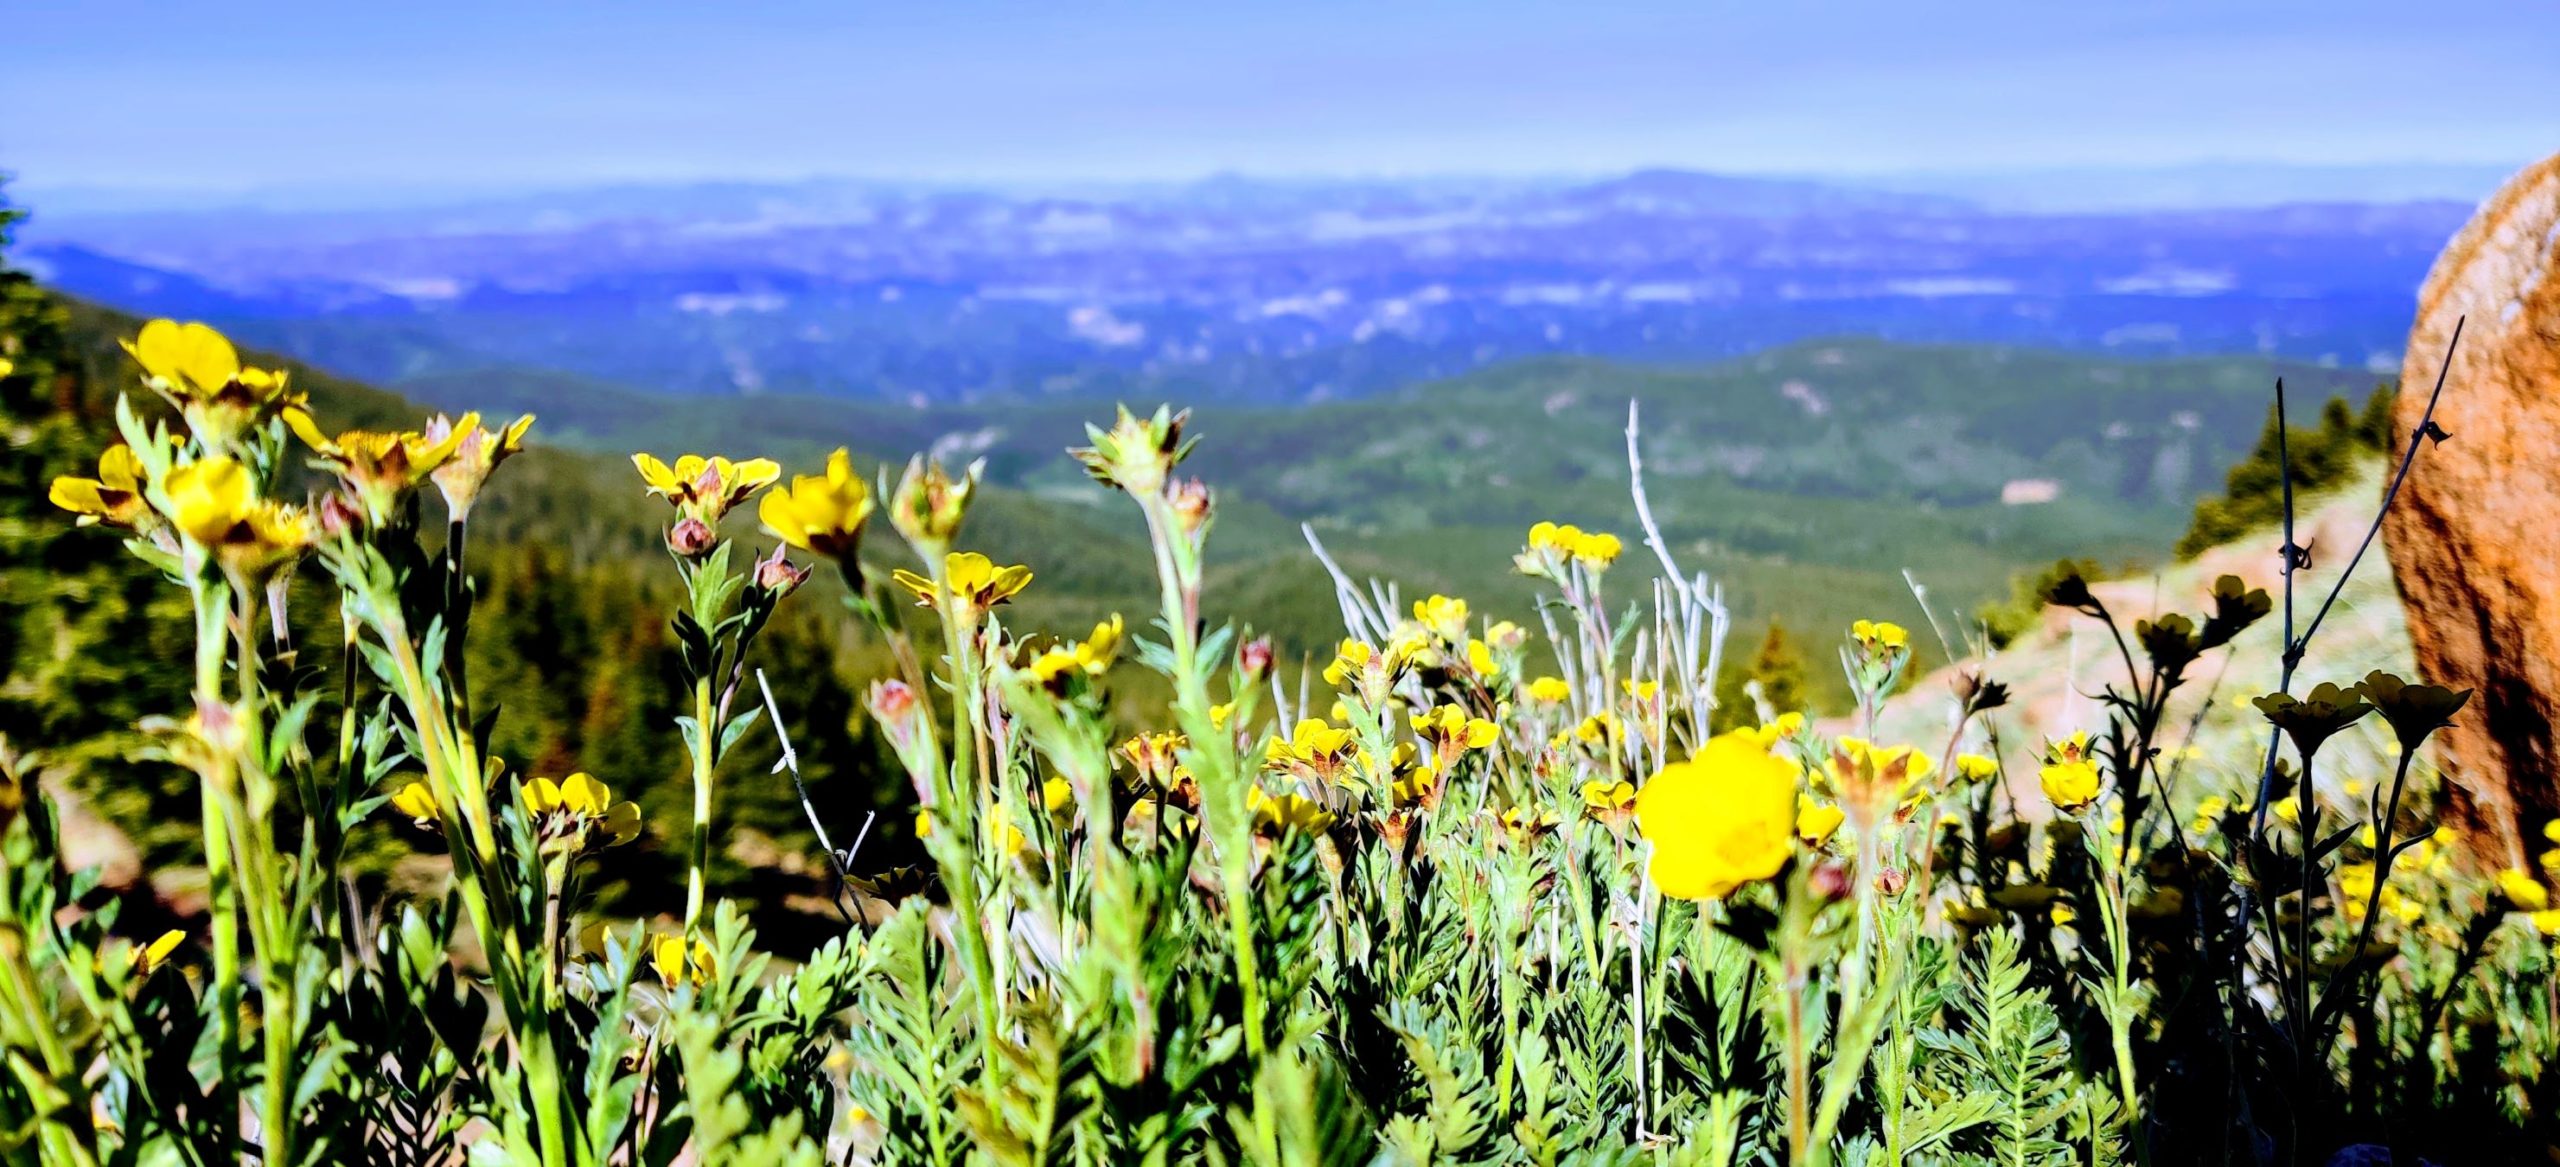 yellow wildflowers bloom high above a mountain valley in the distance